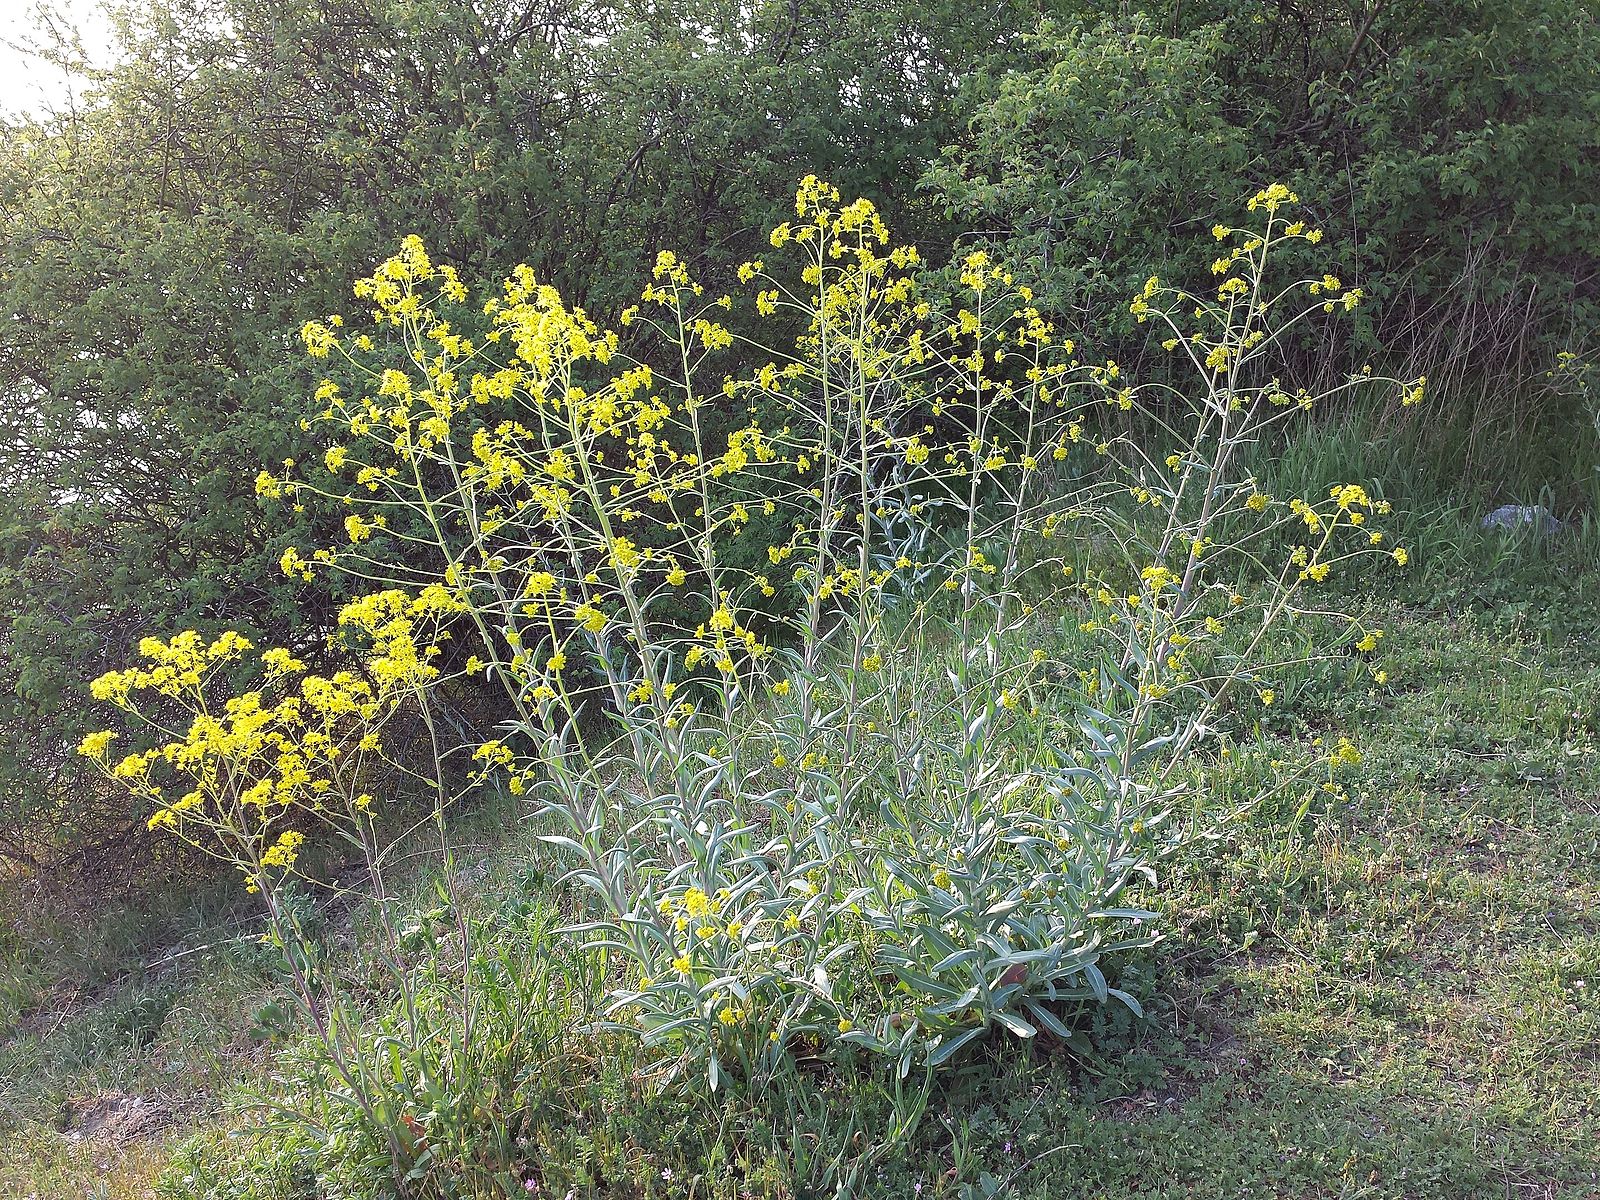 a weed with yellow flowers